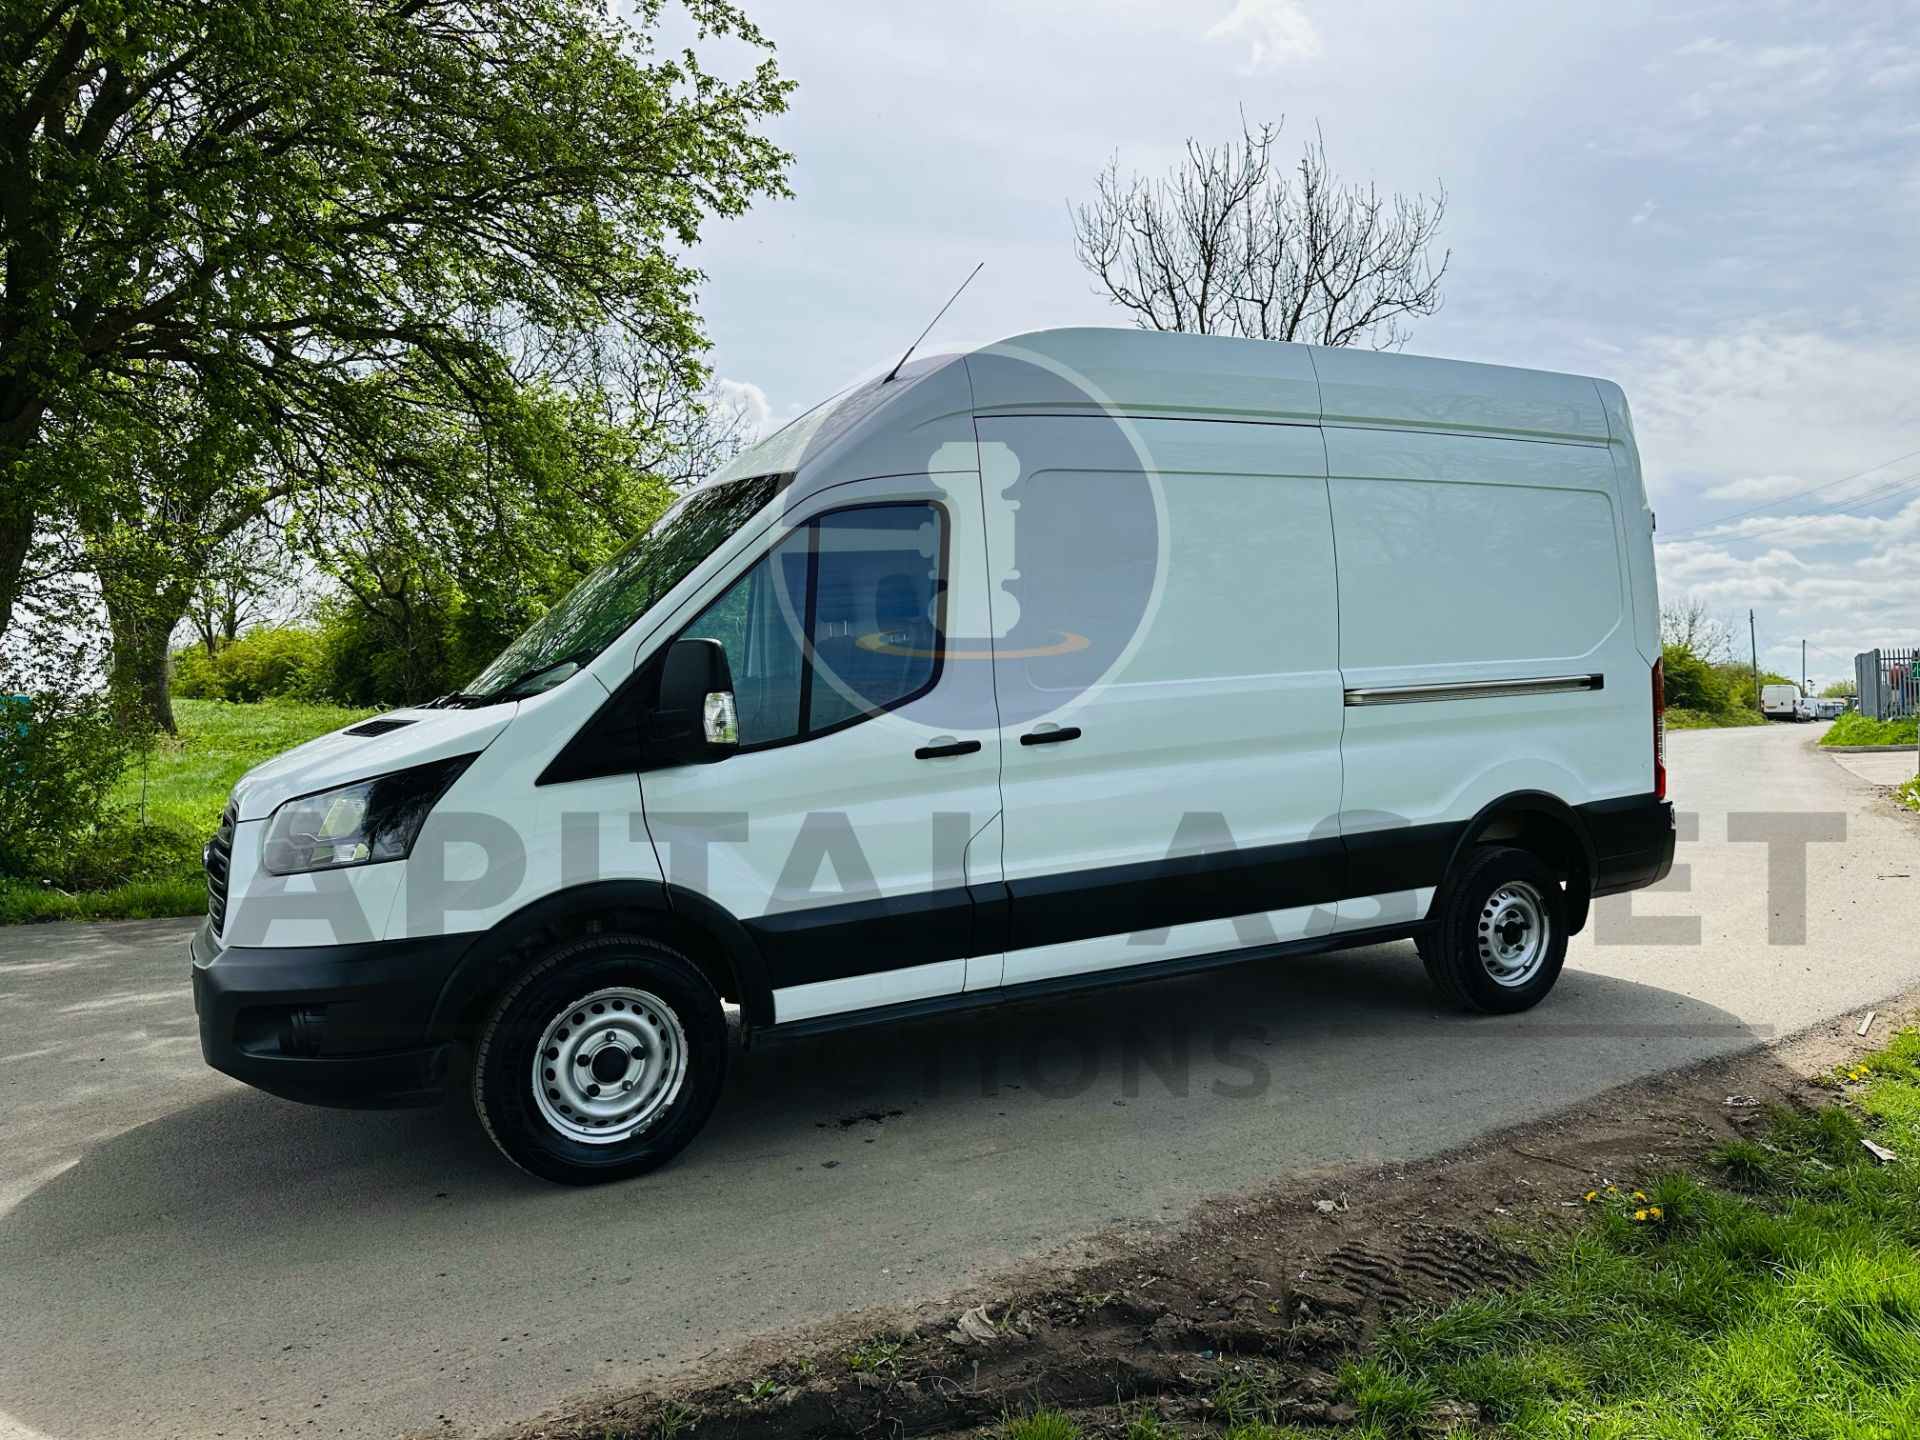 FORD TRANSIT 350 2.0 TDCI *ECOBLUE EDITION* LWB HIGH TOP - EURO 6 - 2019 MODEL - 1 OWNER - LOOK!!! - Image 5 of 32